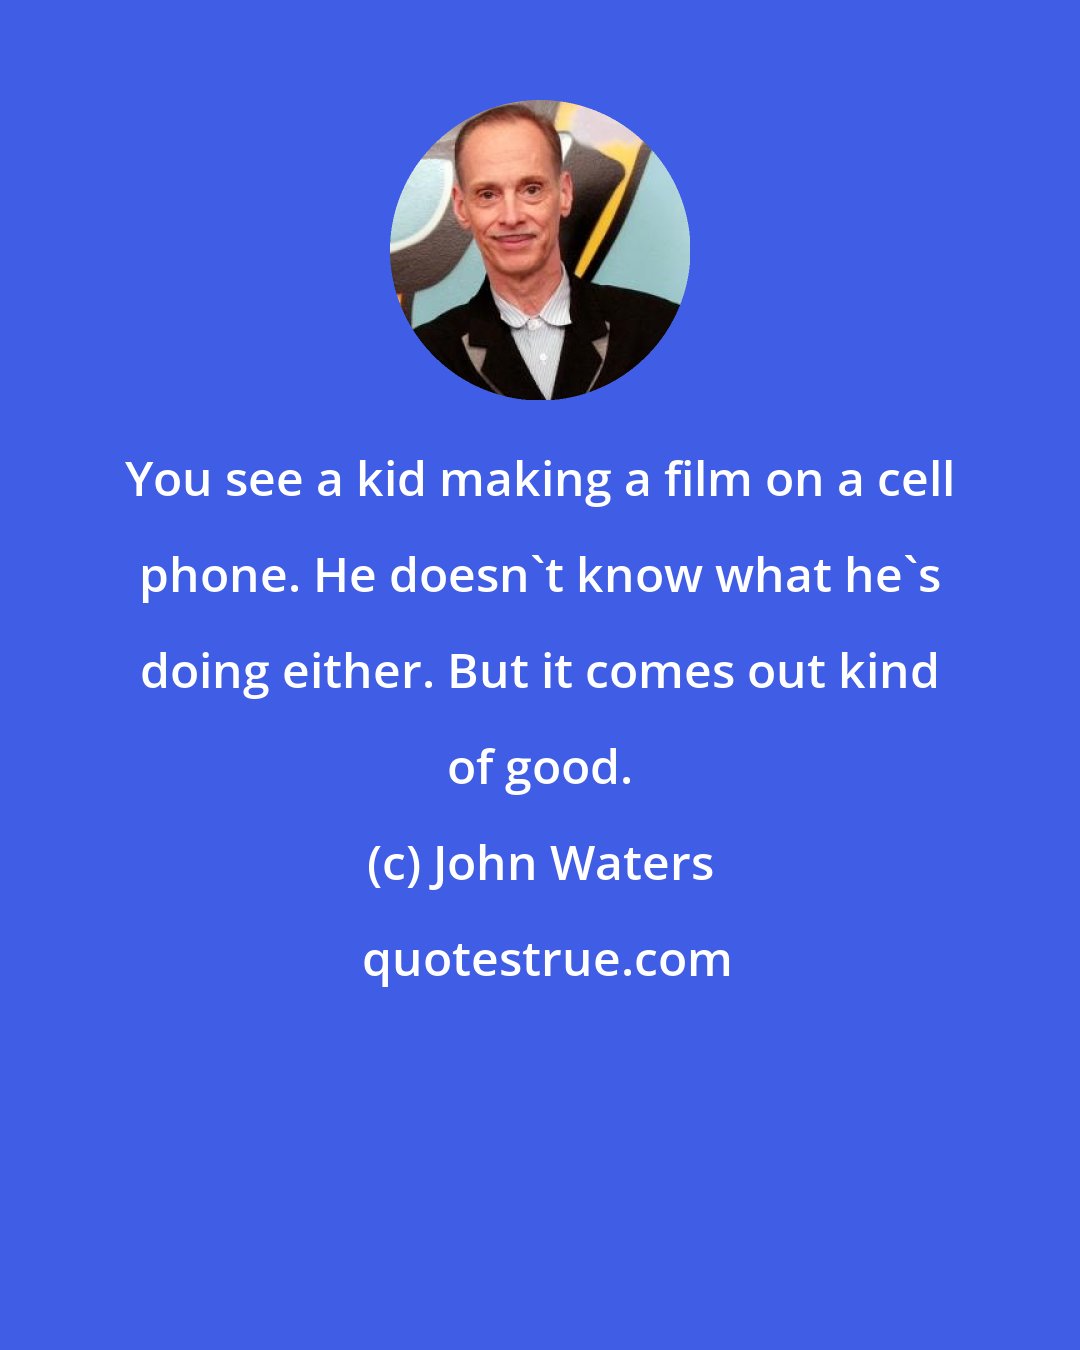 John Waters: You see a kid making a film on a cell phone. He doesn't know what he's doing either. But it comes out kind of good.